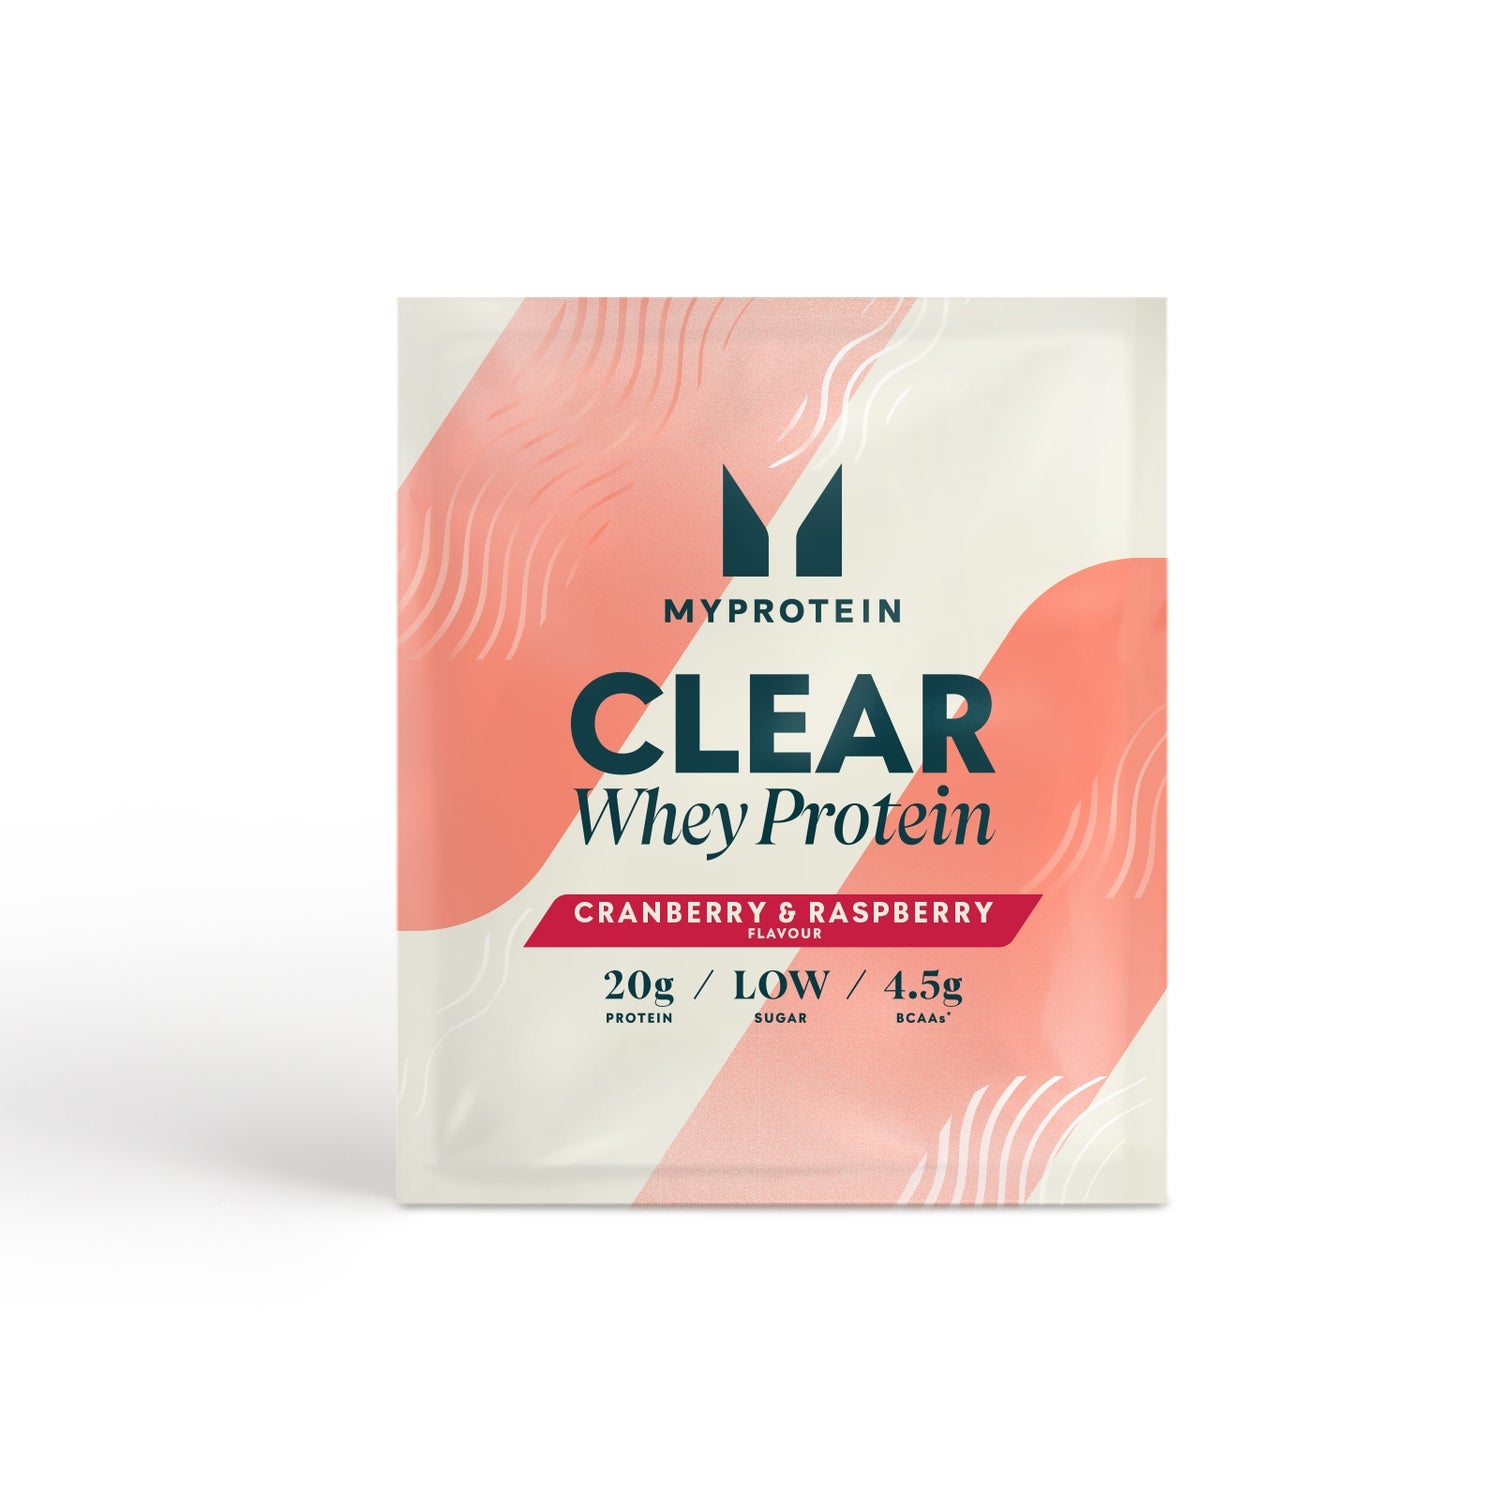 Myprotein Clear Whey Isolate (Sample) - 1servings - Cranberry & Raspberry